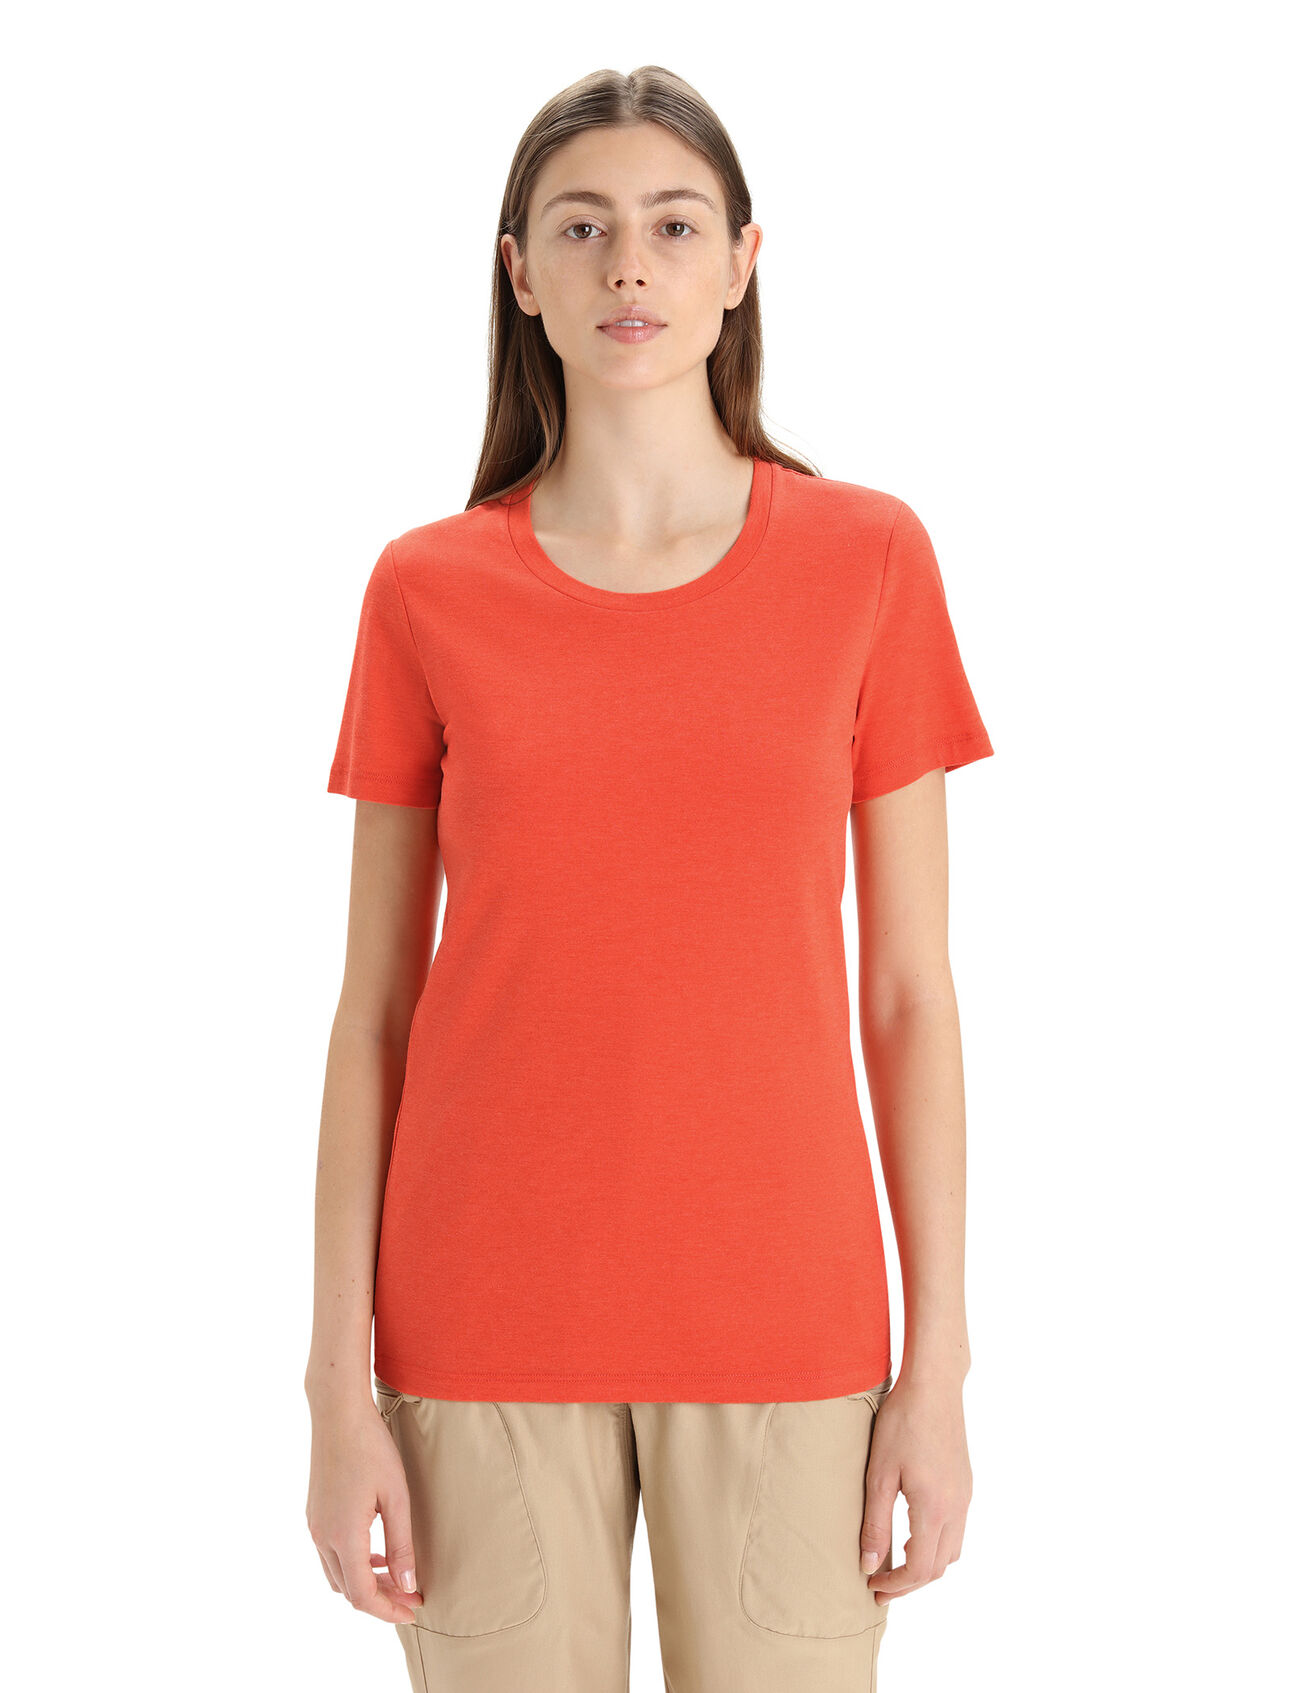 Womens Merino Blend Central Classic T-Shirt A versatile, everyday tee that goes anywhere in comfort, the Central Classic Short Sleeve Tee features a sustainable blend of natural merino wool and soft organically grown cotton.